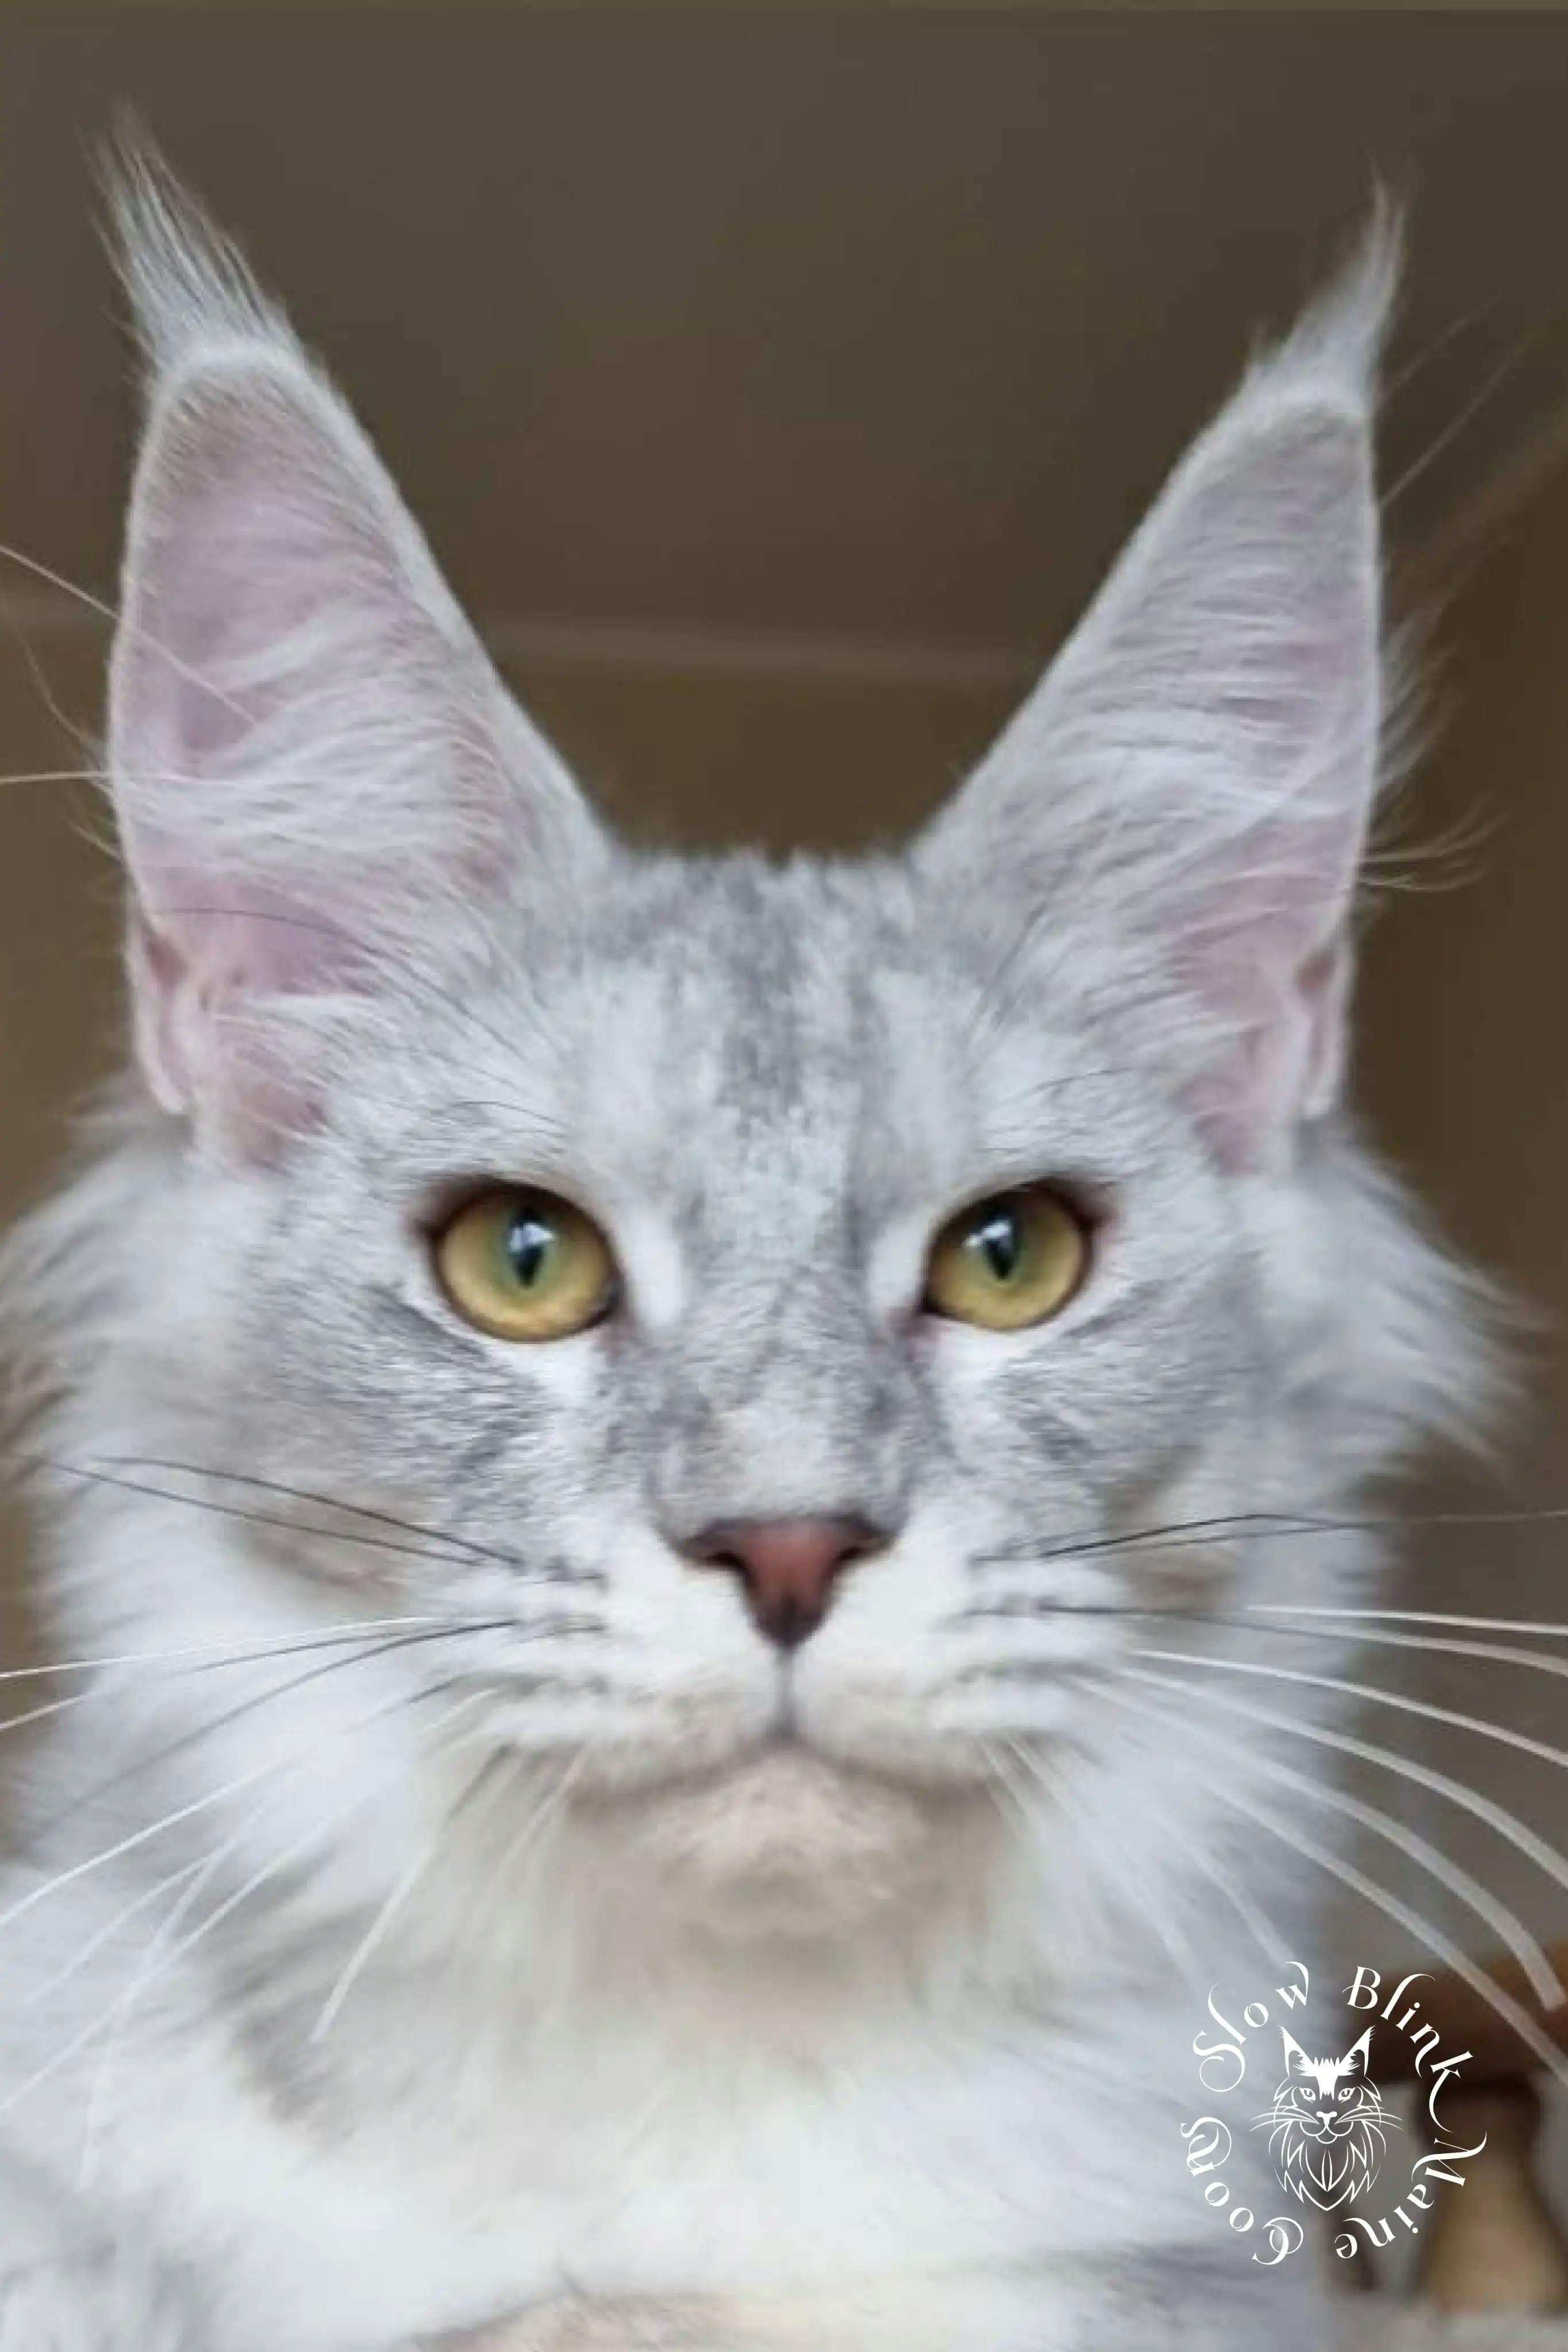 Adult Maine Coon Cat from SlowBlinkMaineCoons > wizard | male | high silver | silver shaded | maine coon | light blue tabby | ems code as 21 | 6 months old | 2